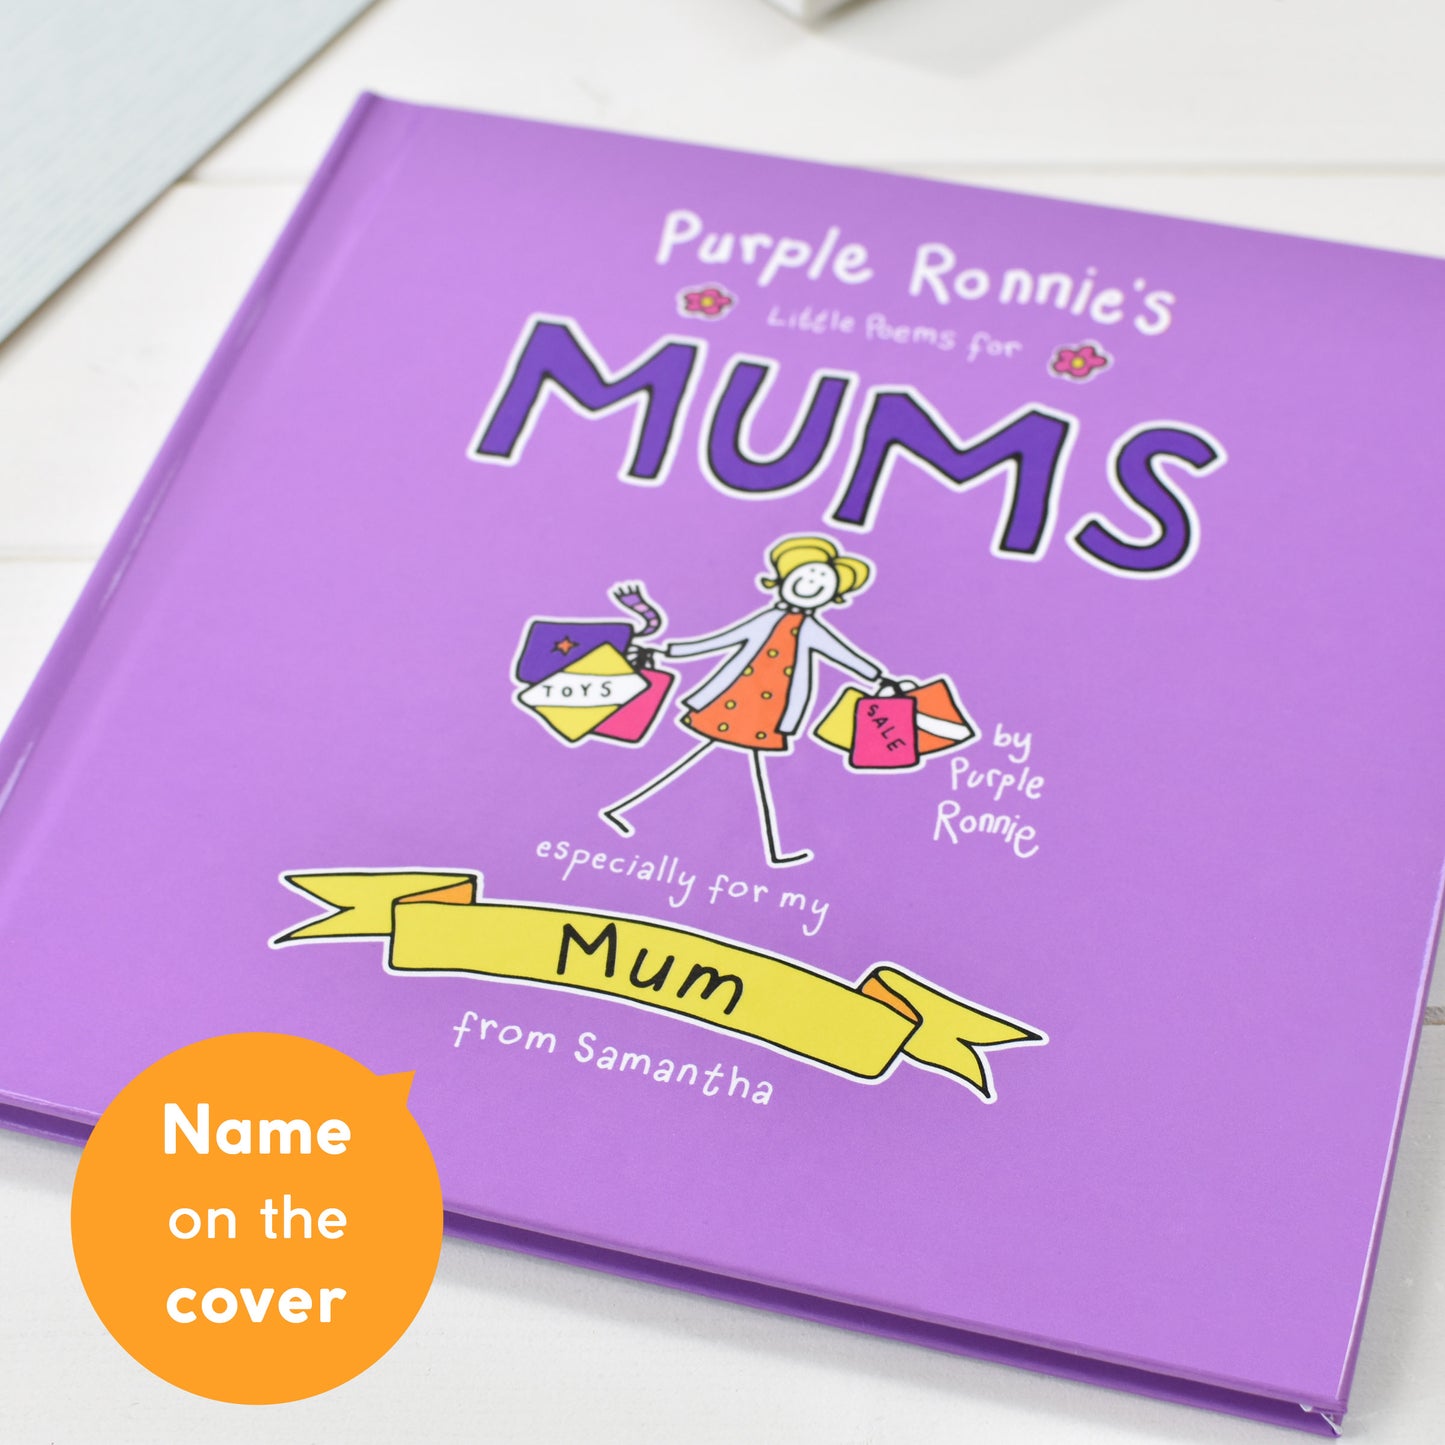 Purple Ronnie's Little Poems for Mums